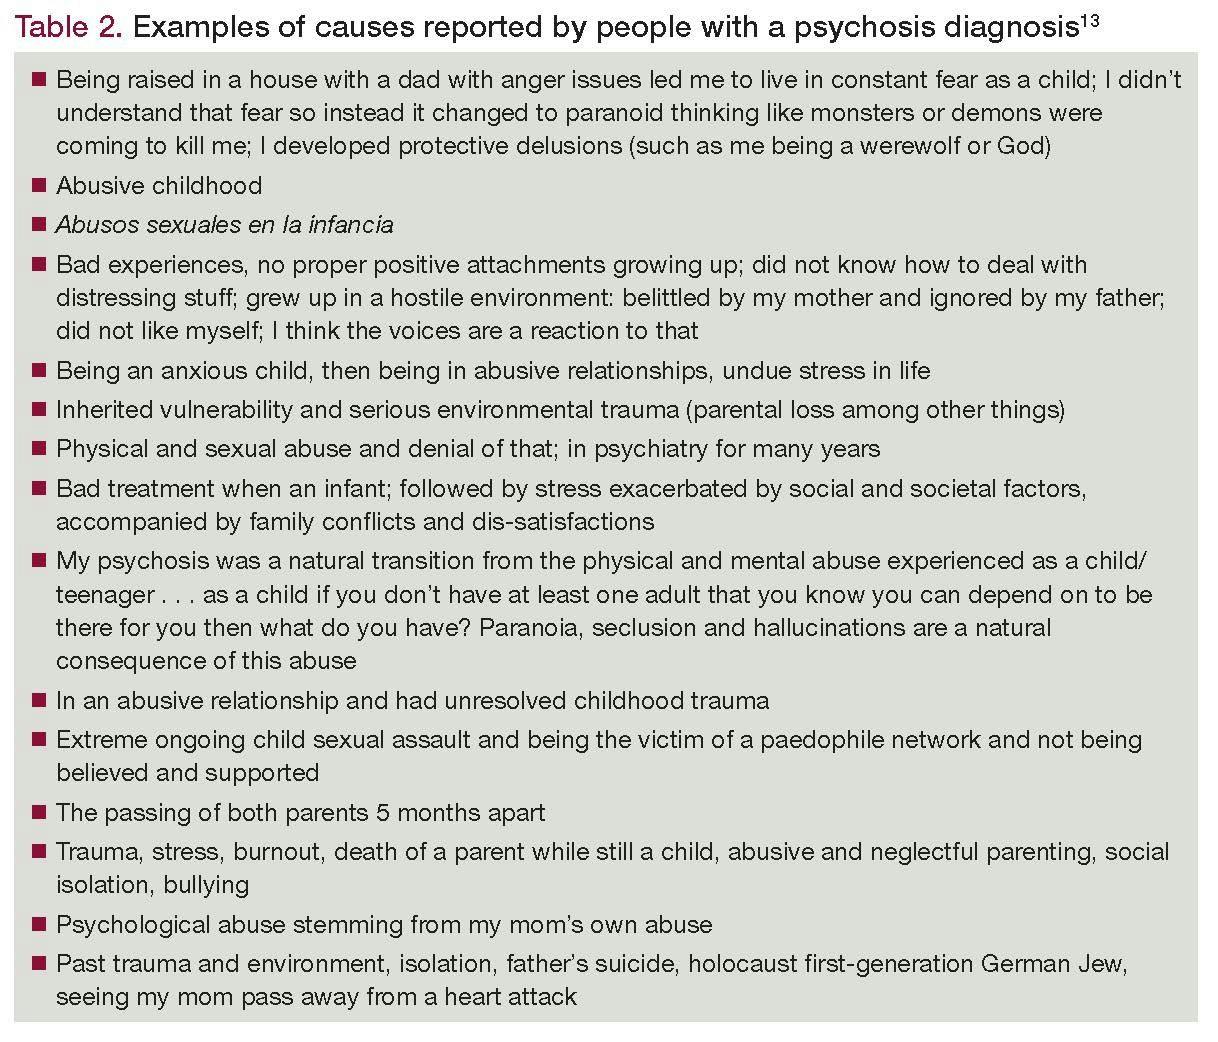 Table 2. Examples of causes reported by people with a psychosis diagnosis